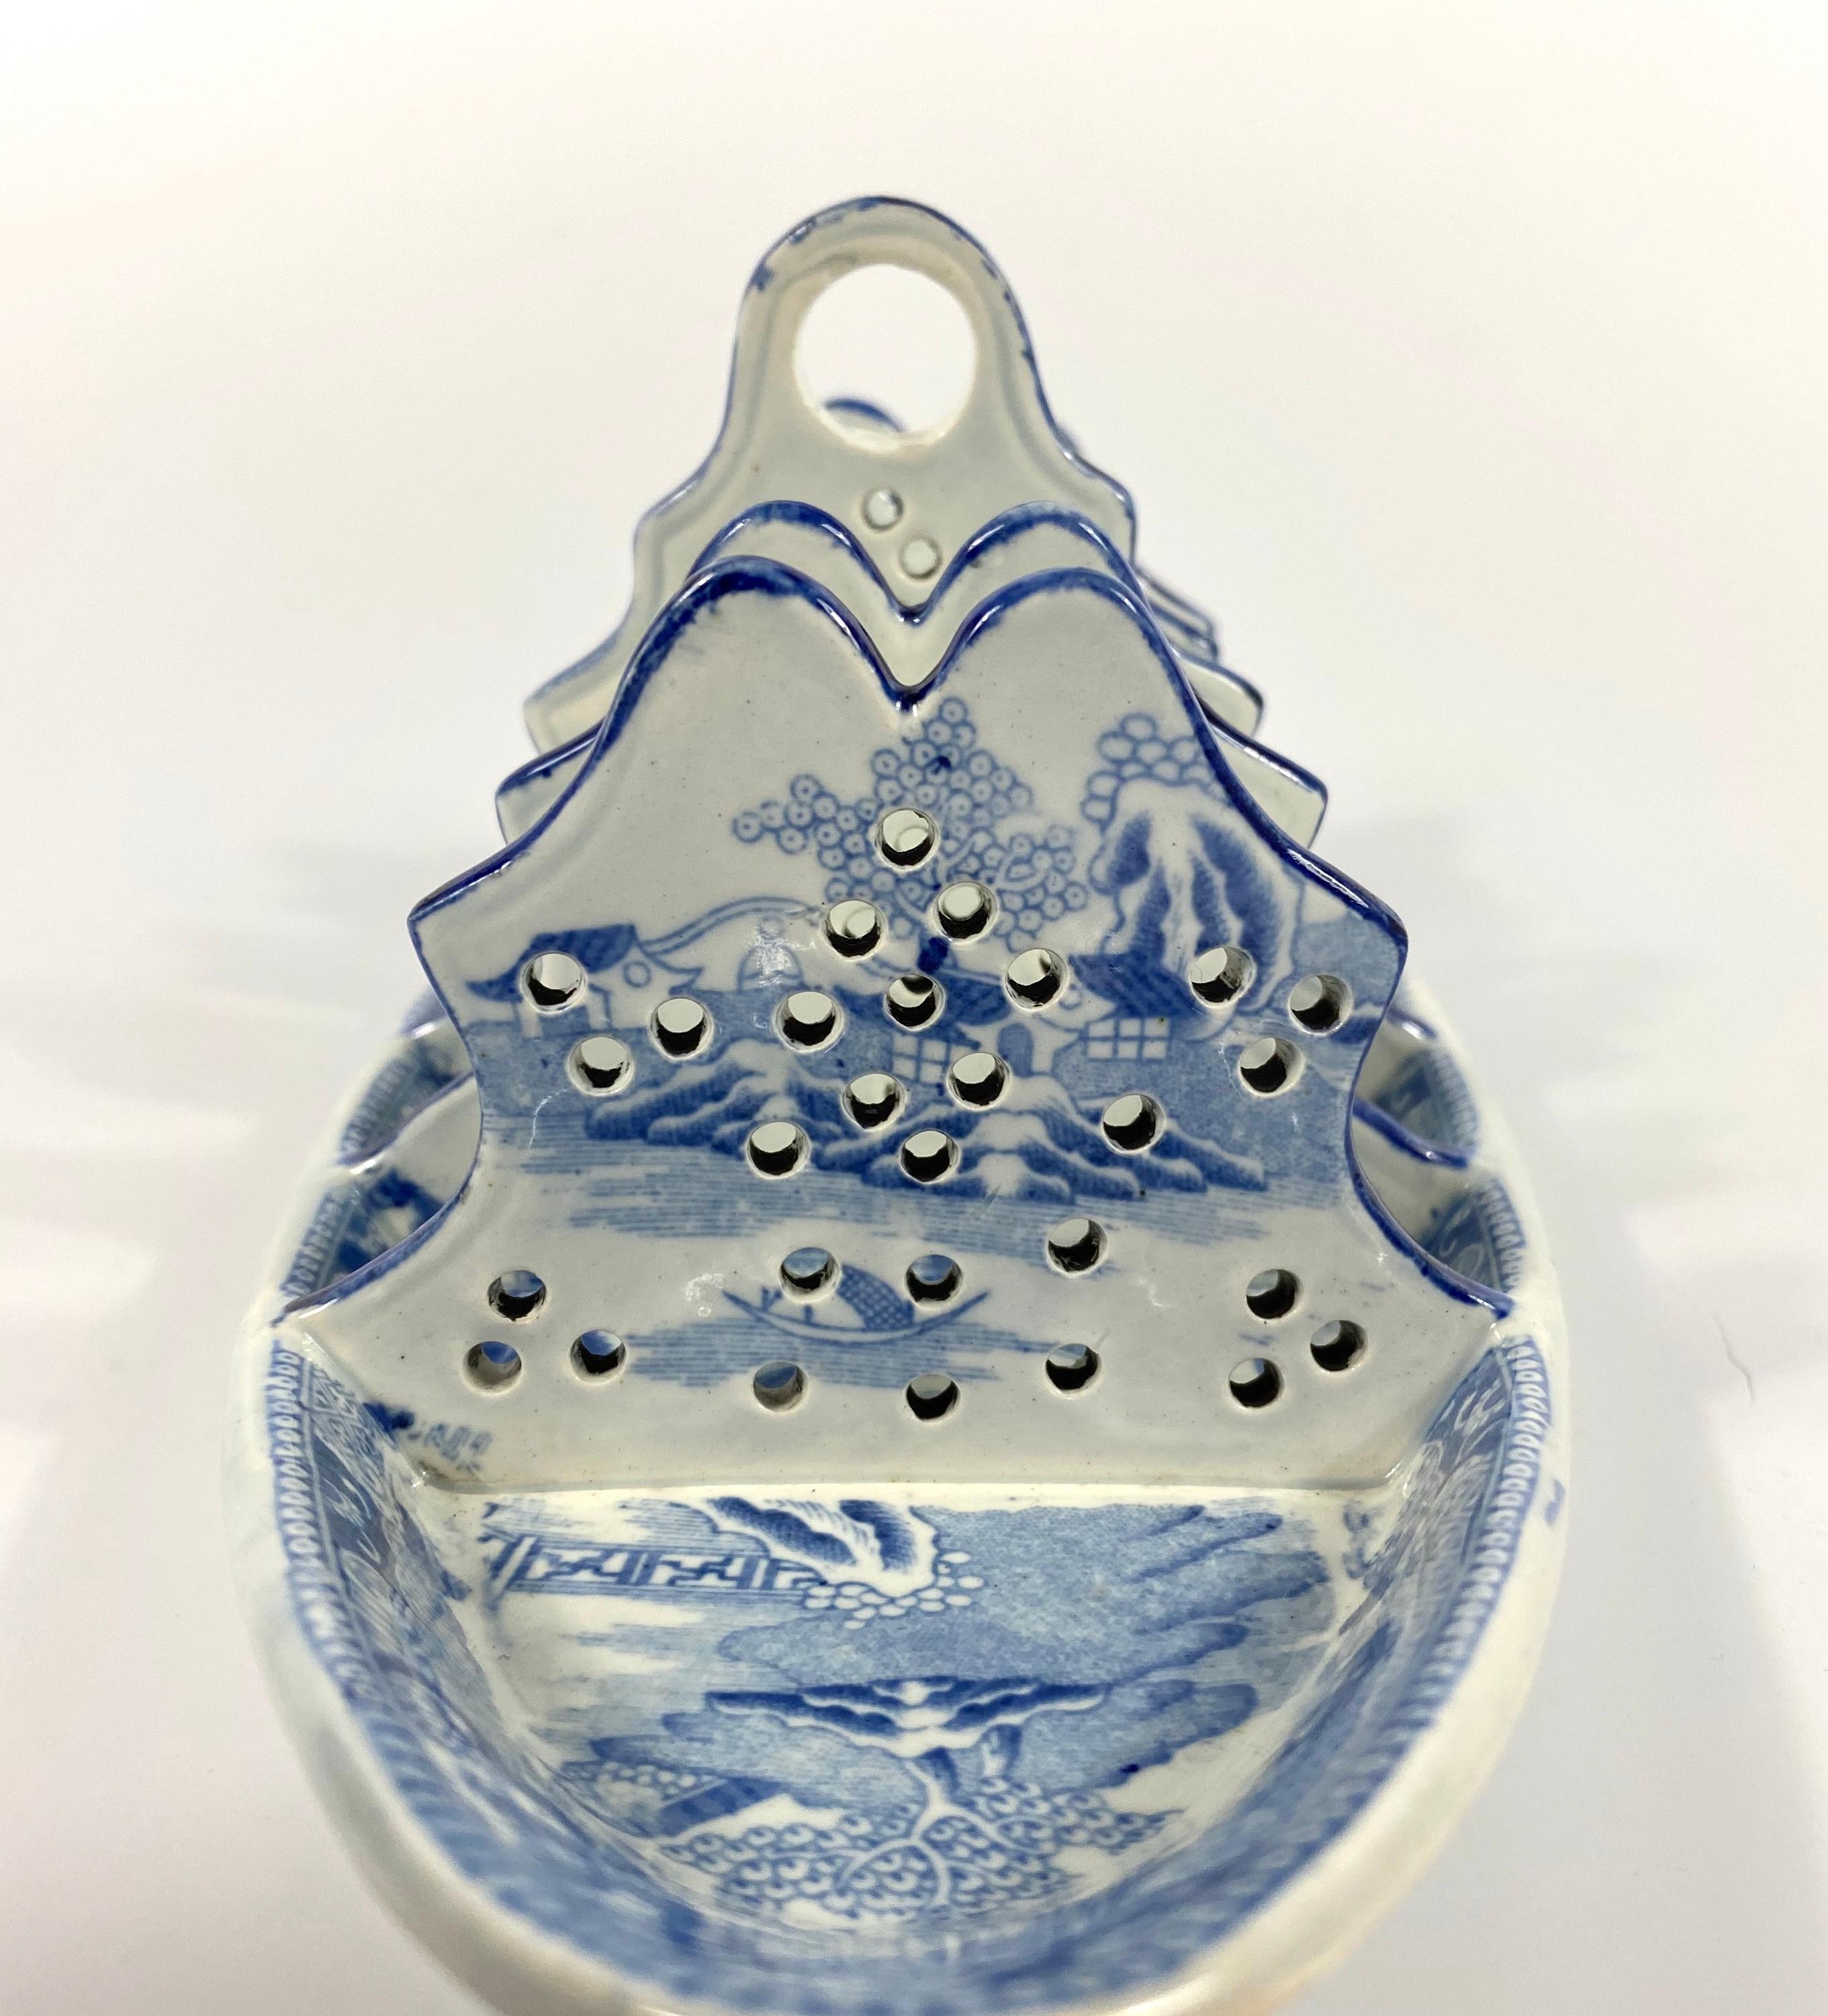 Fired Rare Spode Pearlware Toast Rack, Willow Pattern, circa 1820